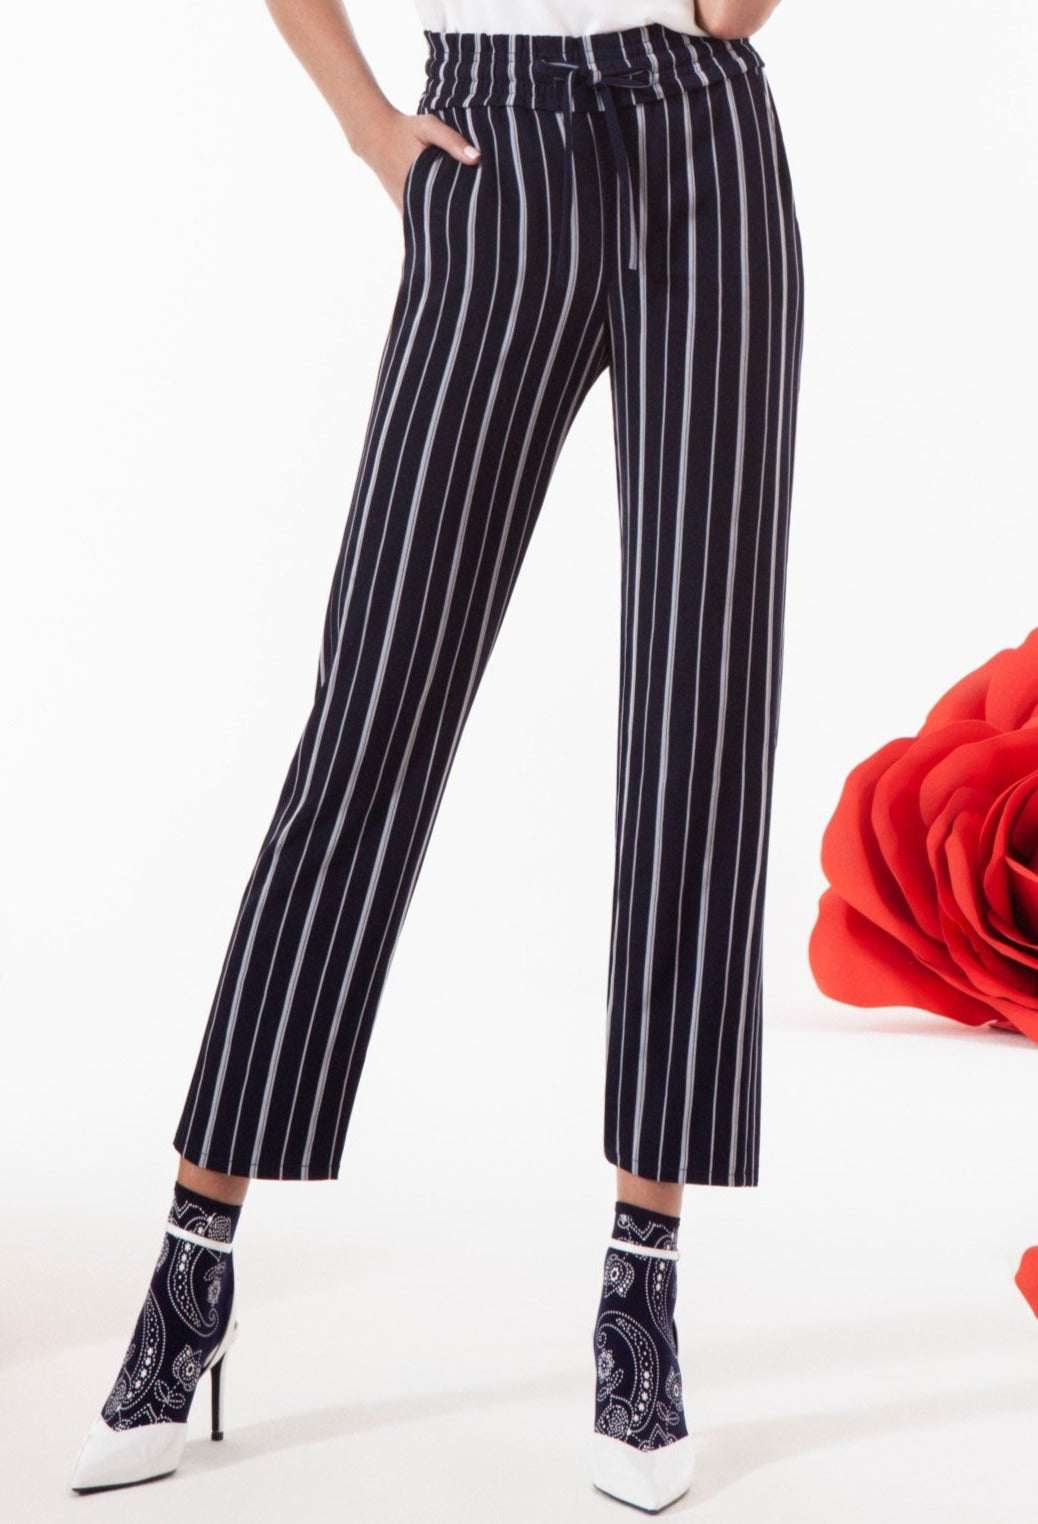 Omsa 3638 Leggings Pantalone Gessato - Navy cropped wide leg palazzo pants with white stripes, pockets and elasticated waistband with draw string.